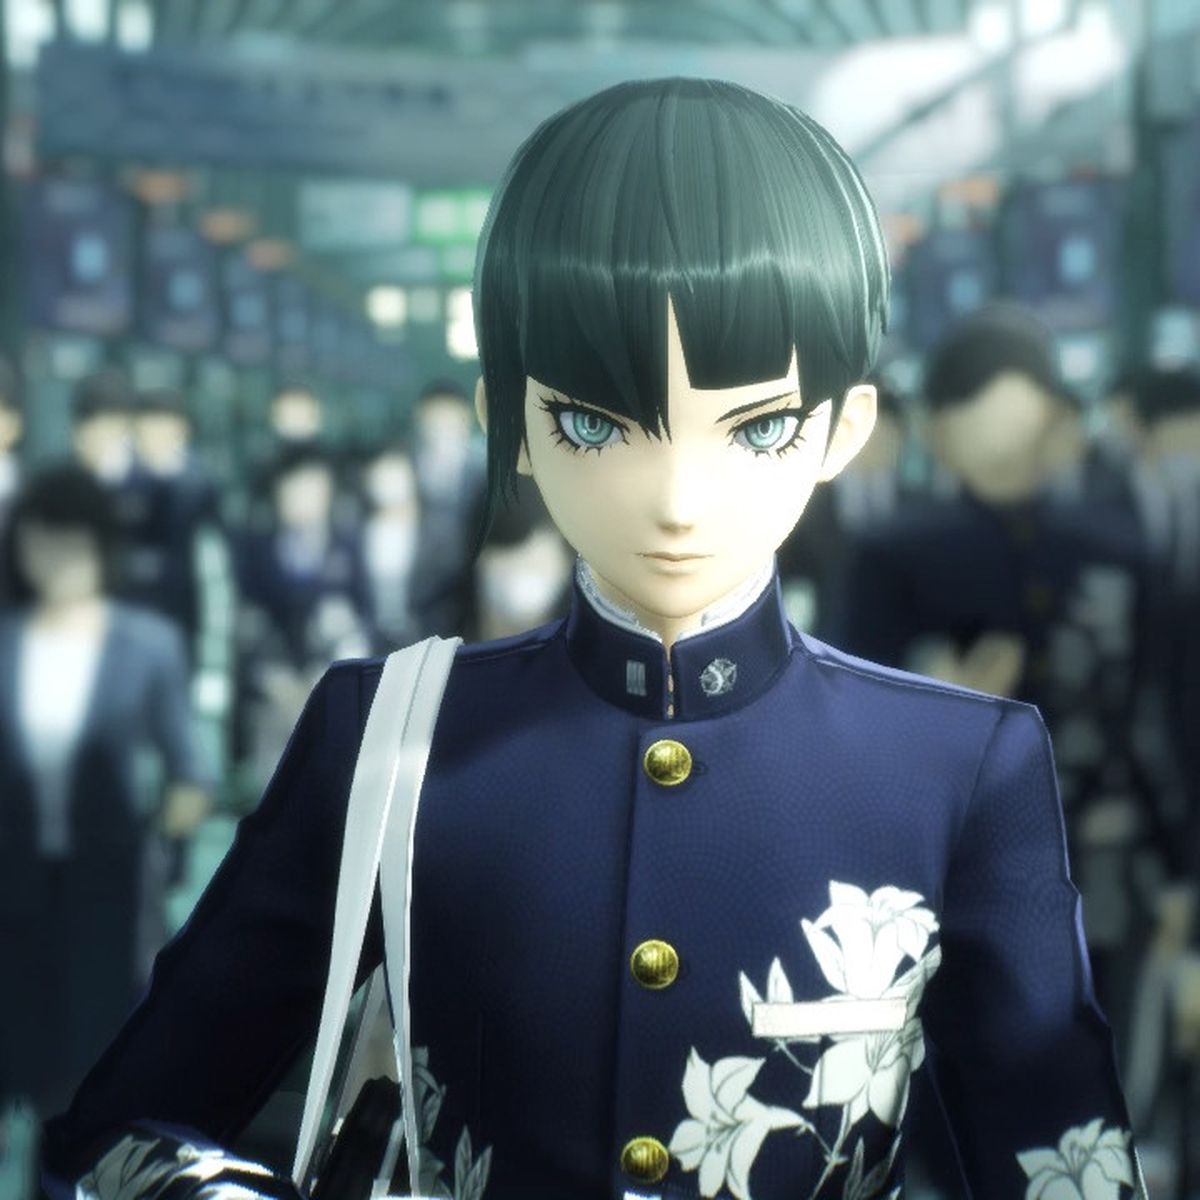 The protagonist of Shin Megami Tensei 5 is an ordinary student, at first